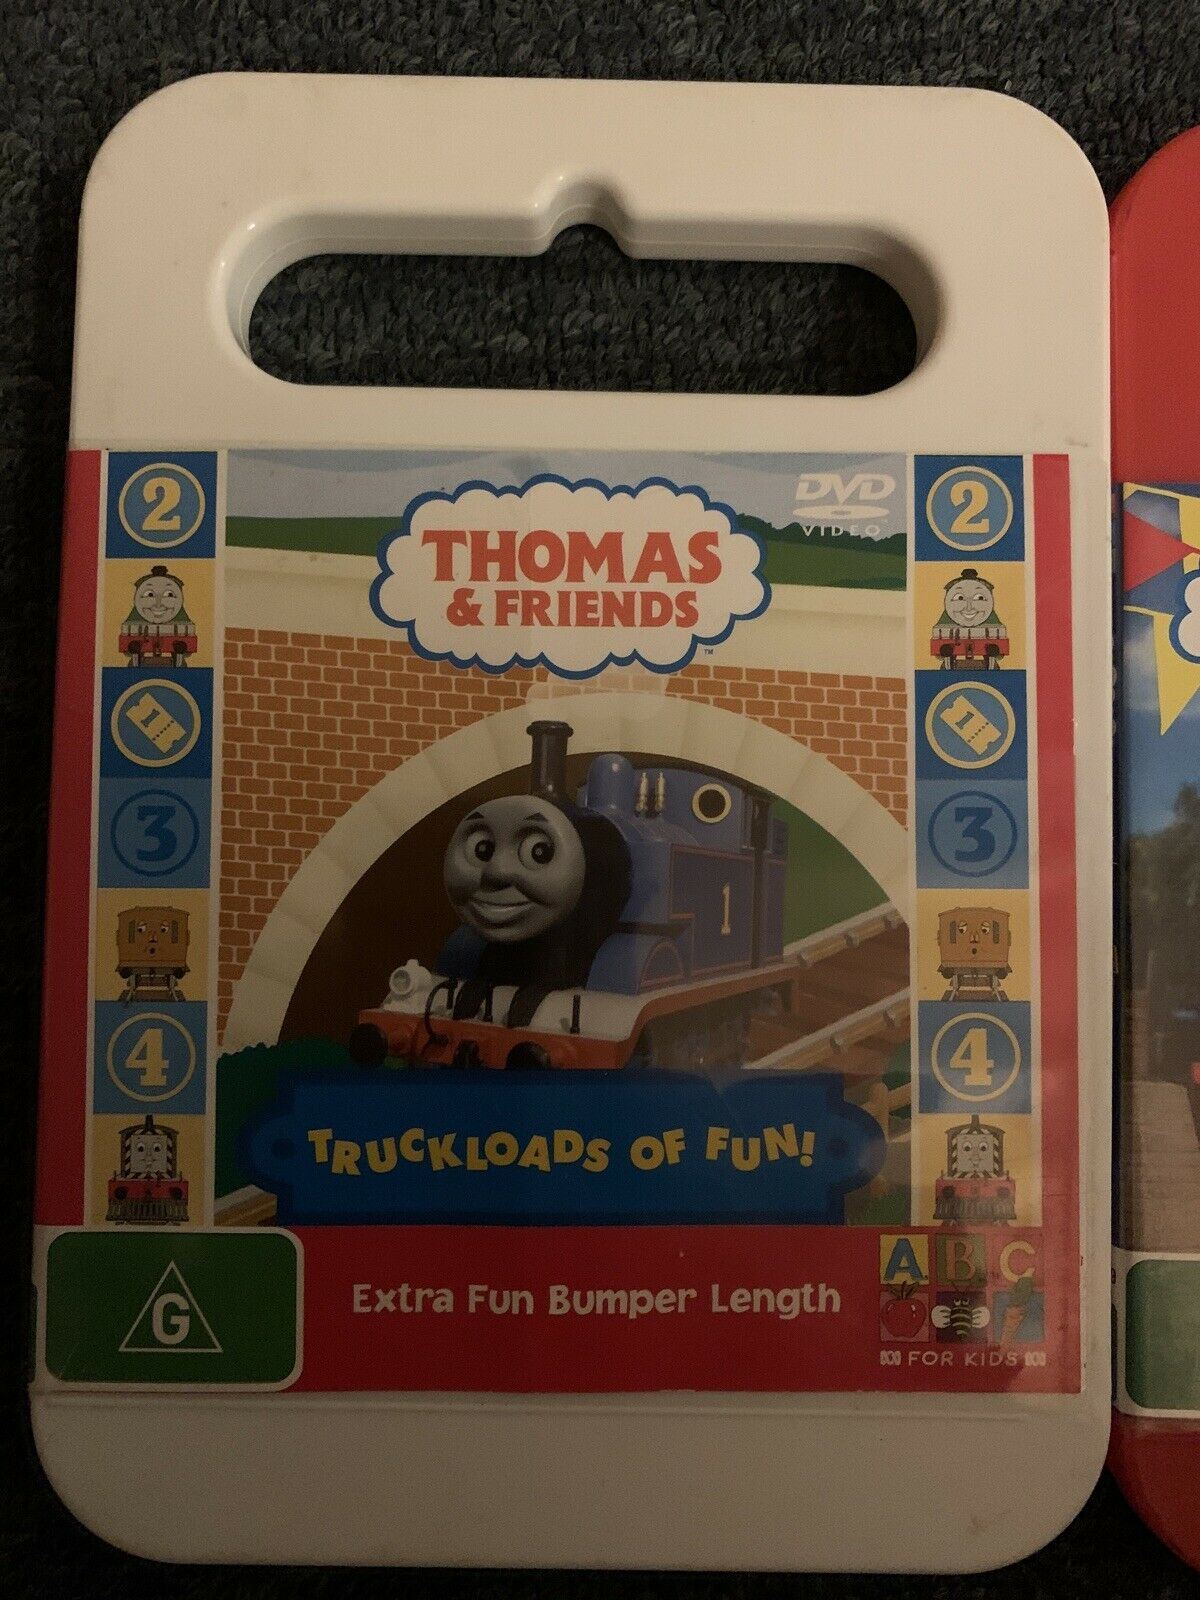 3x Thomas & Friends DVD Region 4  - Truckloads of Fun! The Party Surprise...